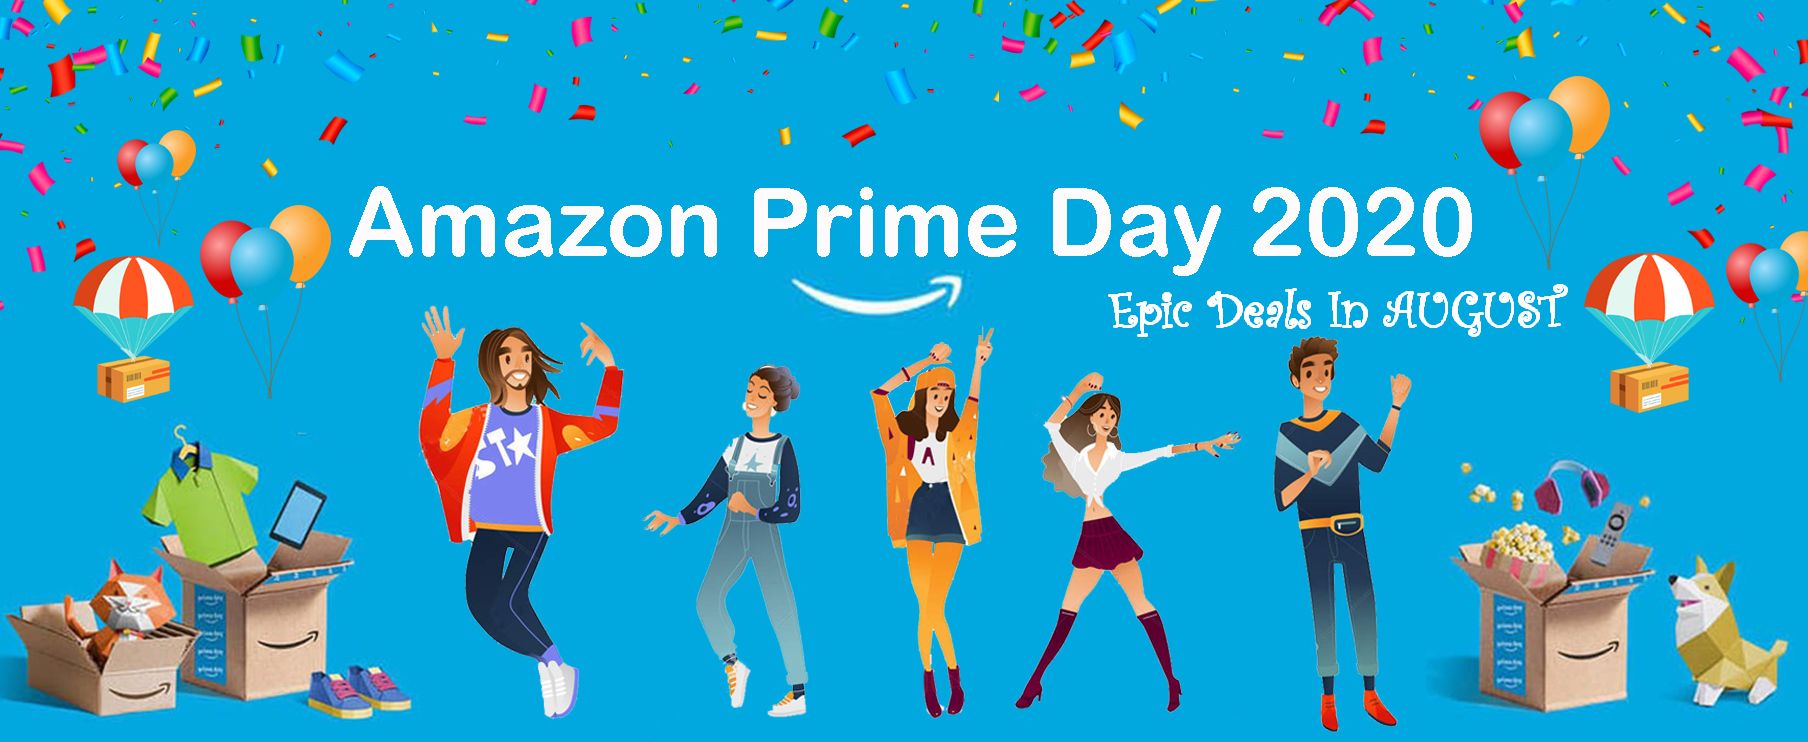 Amazon Prime day 2020 massive shopping holiday when is the next amazon prime day 2020 ? date postponed to August.